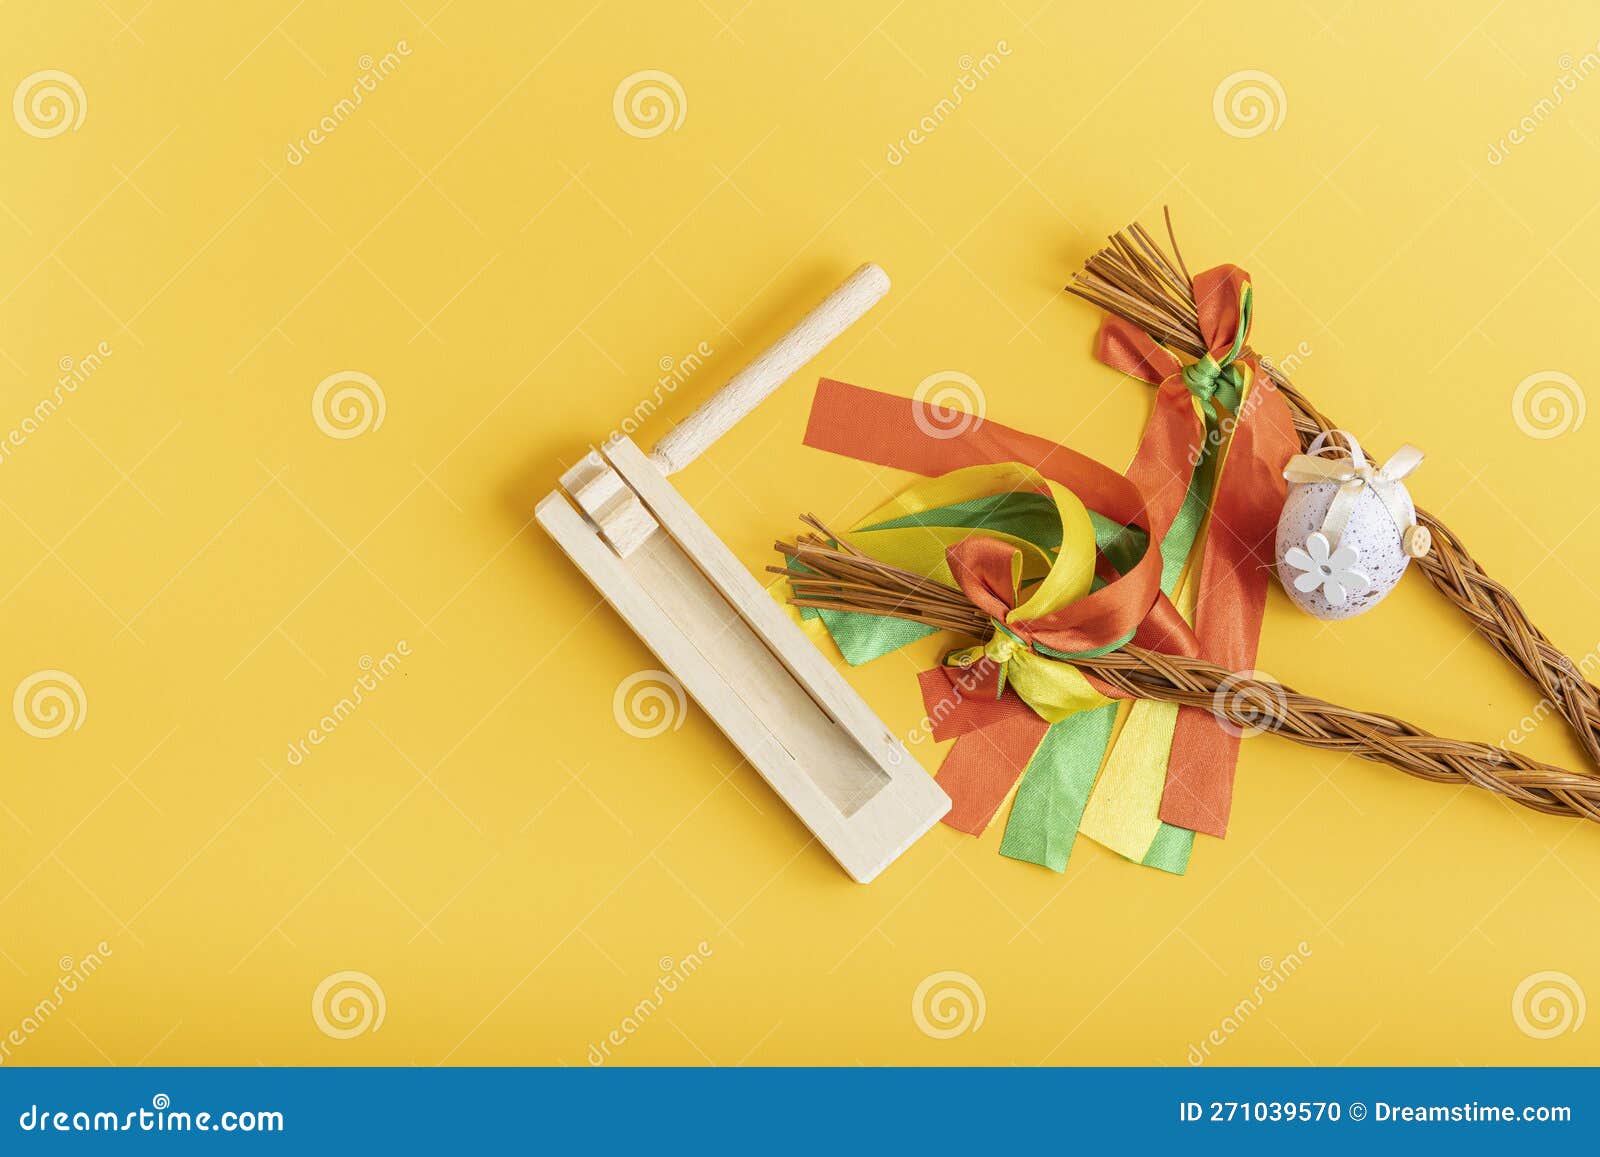 easter whips, egg and rattle clapper on orange background, flat lay, top view